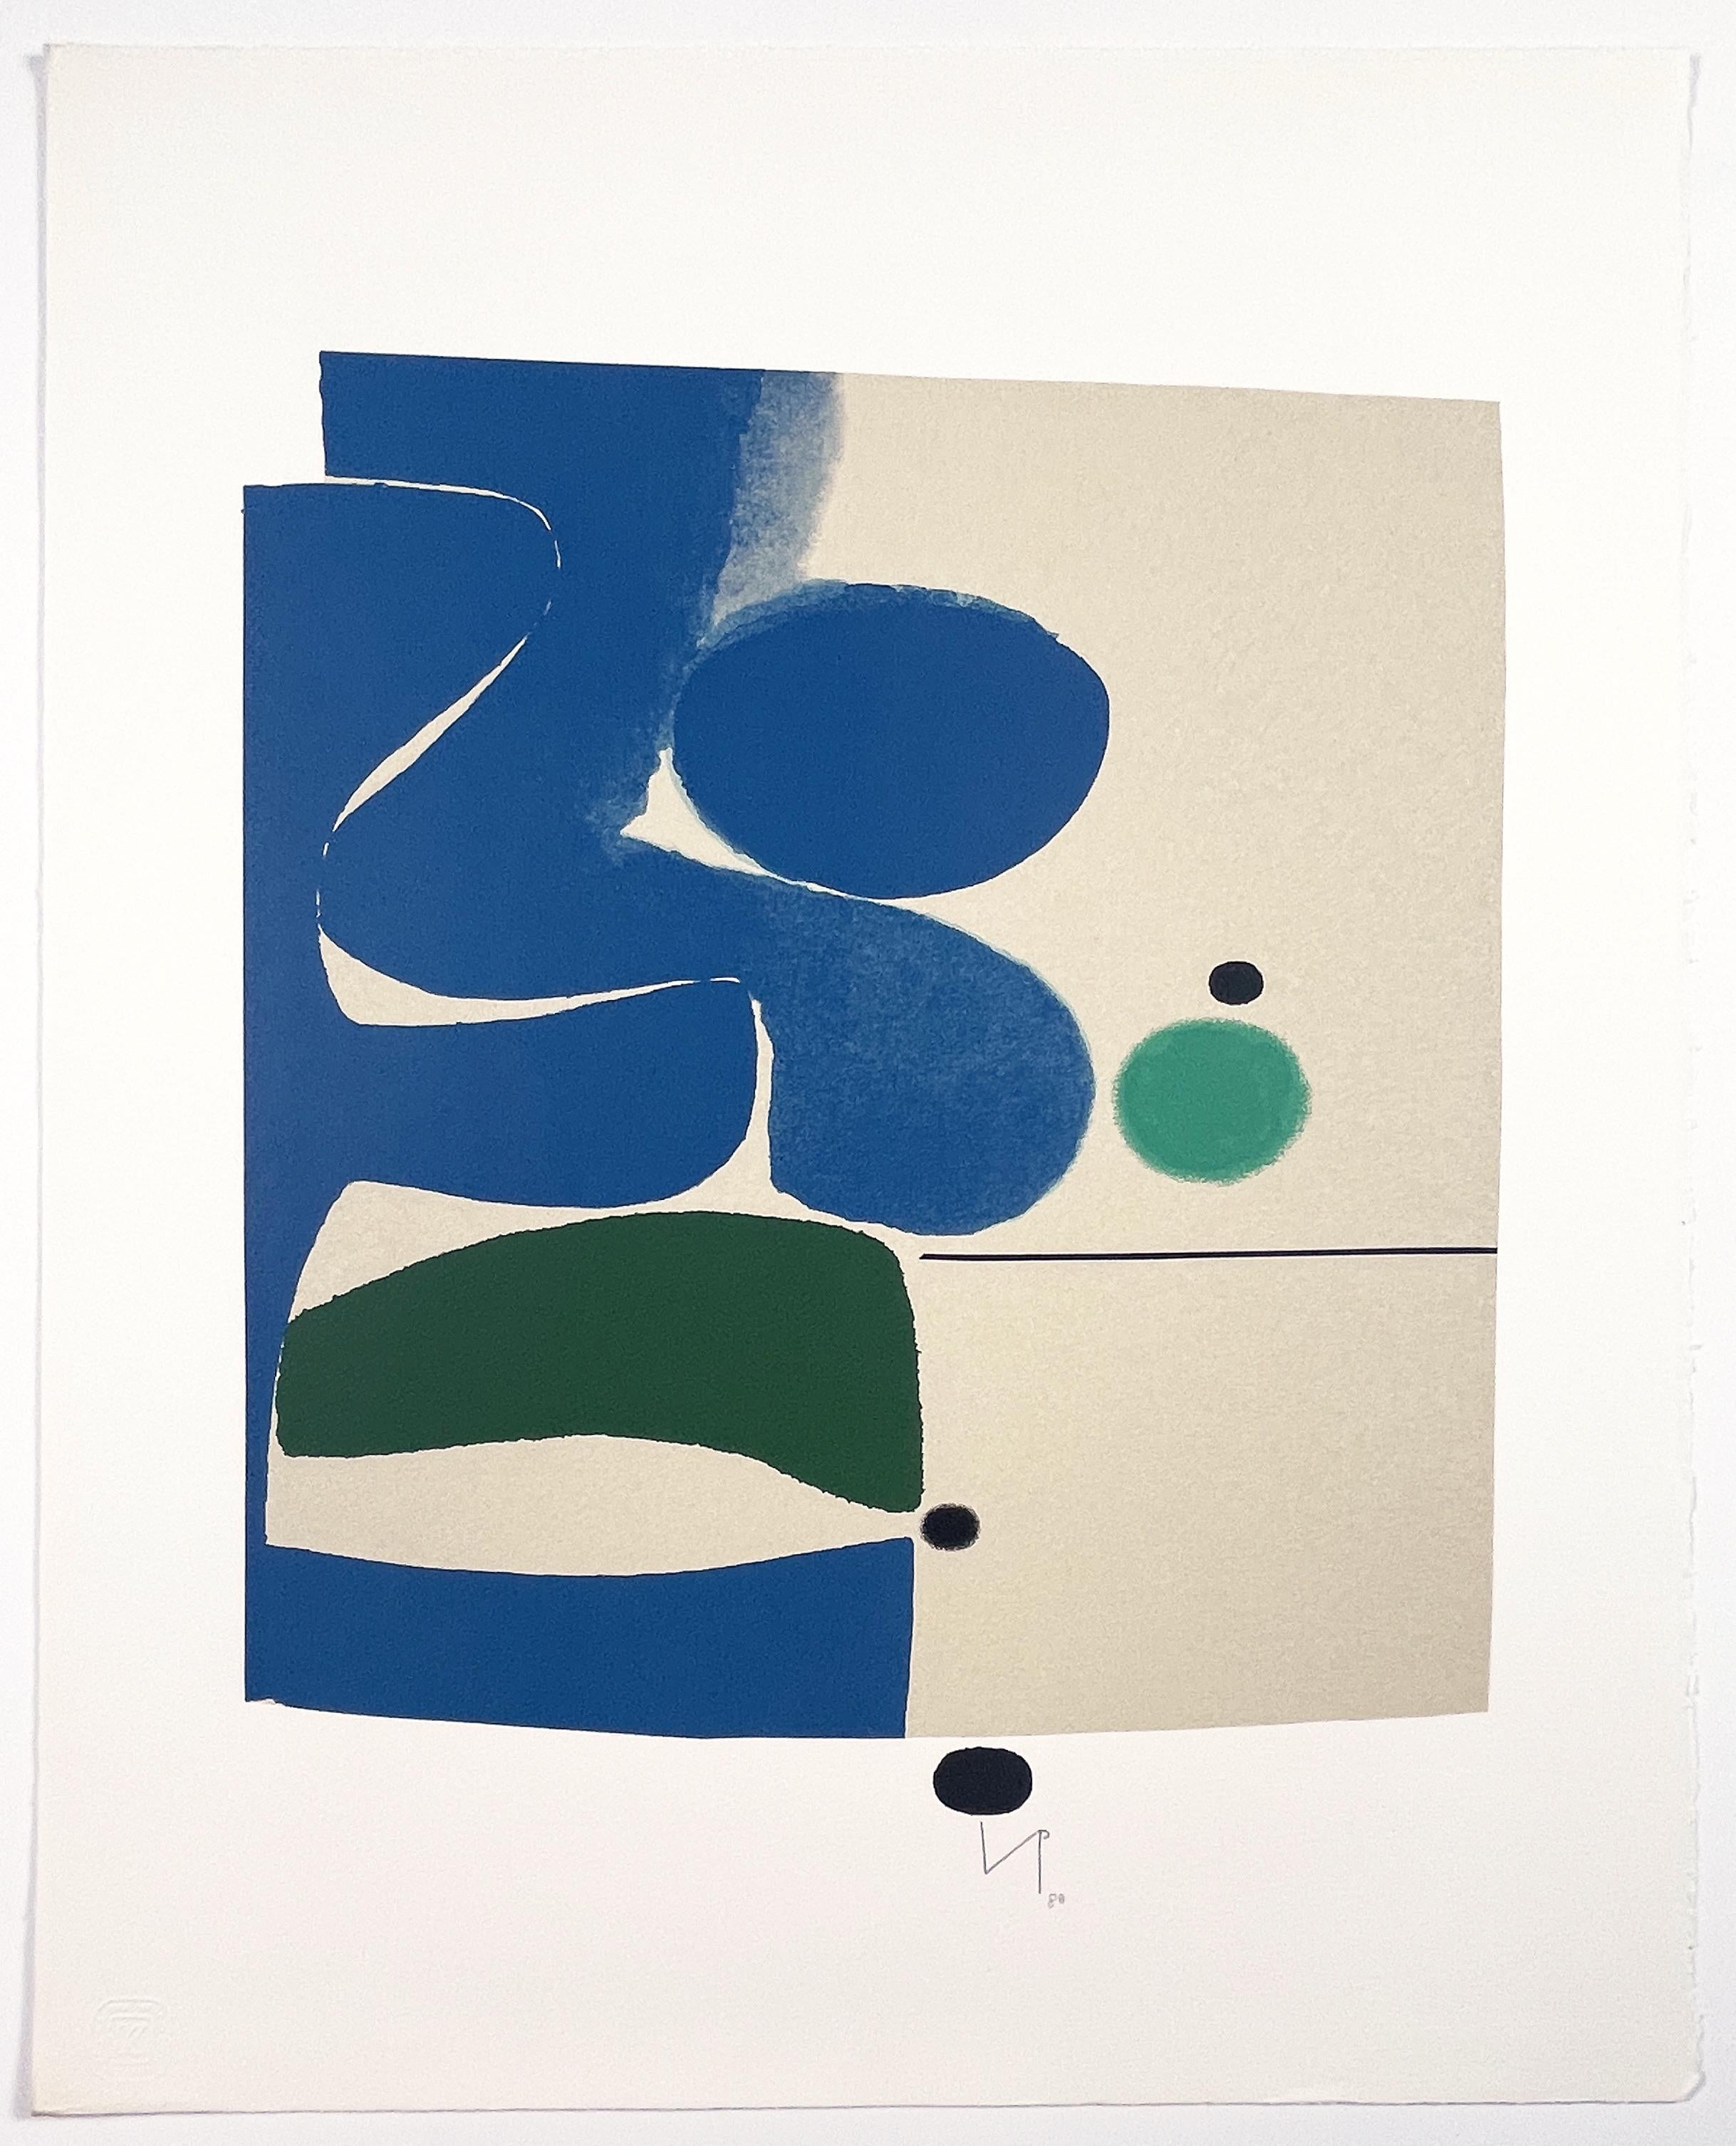 A tranquil, blue, green and tan abstract composition by the iconic British artist Victor Pasmore. Geometric and curvilinear shapes are placed harmoniously with a thin black line and small circles. Signed by the artist with initials in pencil.